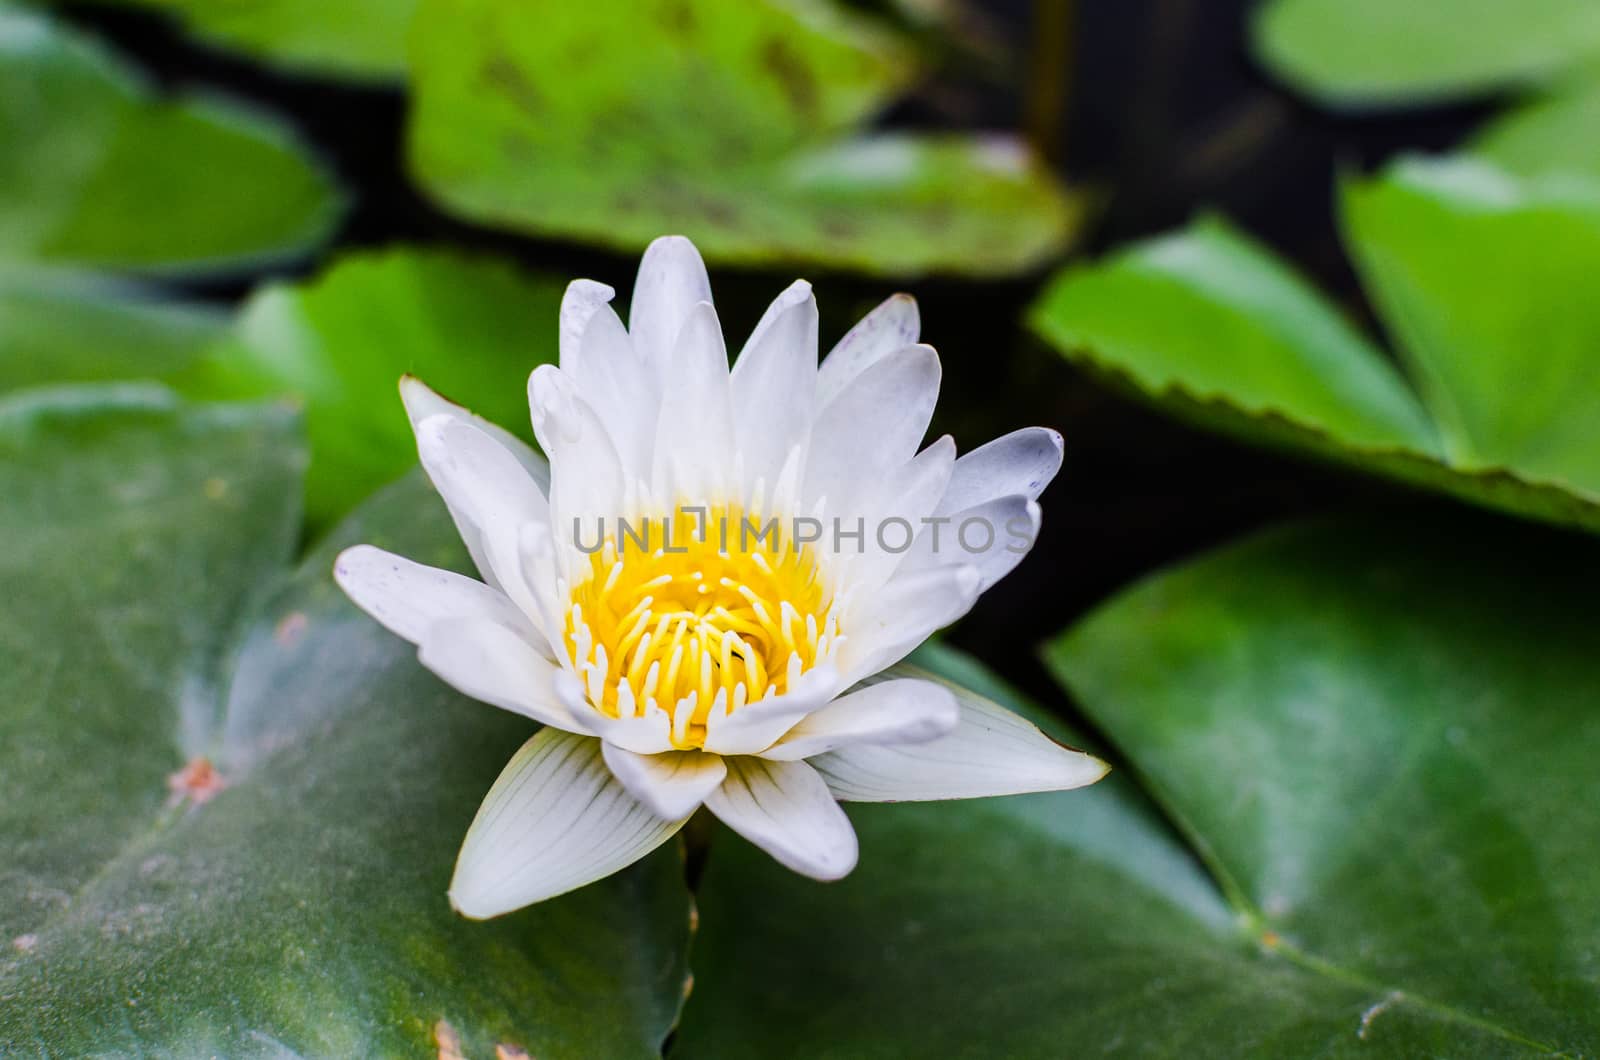 A beautiful white waterlily or lotus flower in pond